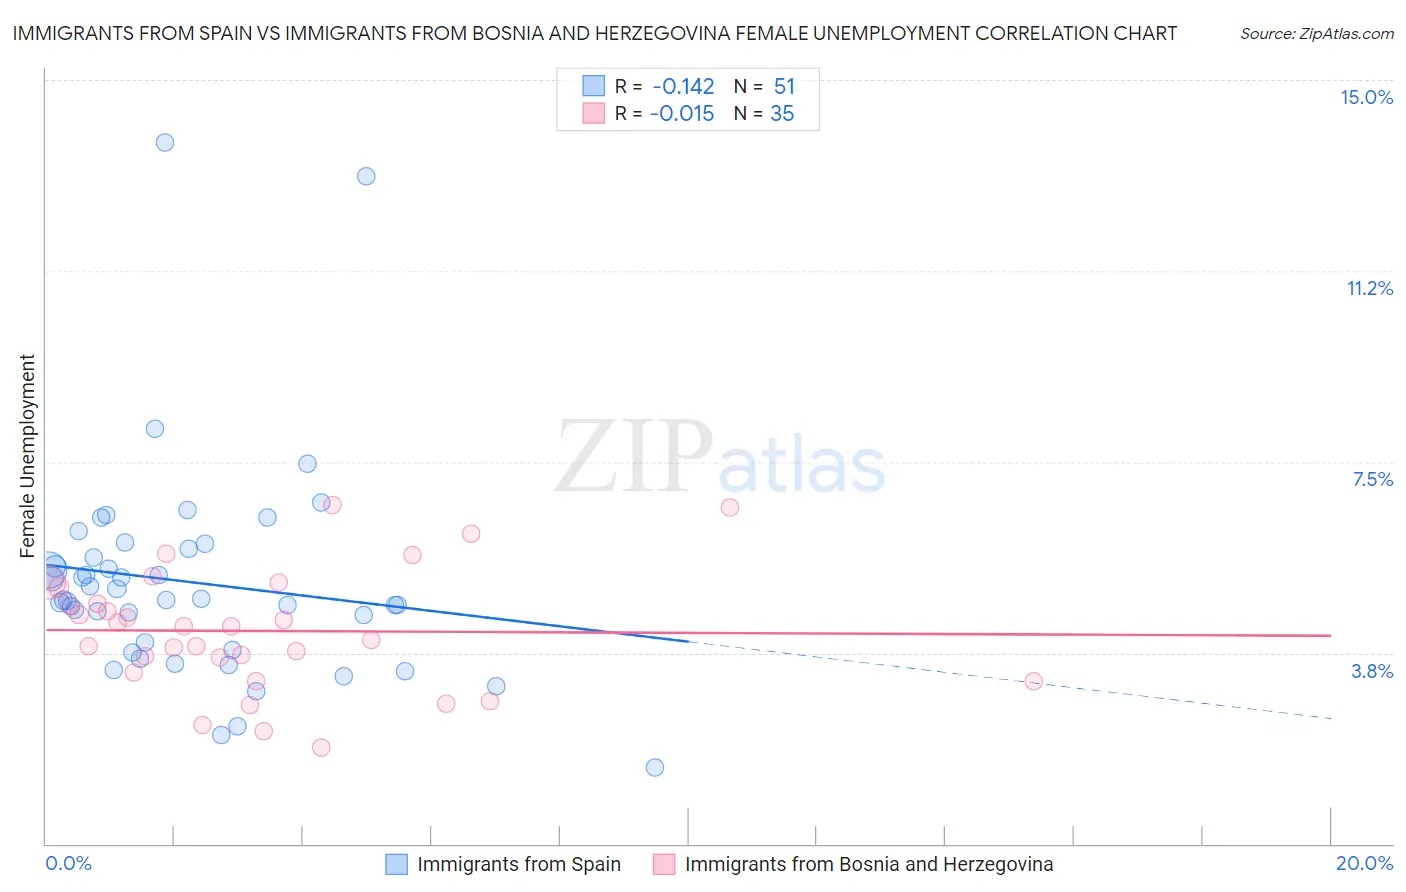 Immigrants from Spain vs Immigrants from Bosnia and Herzegovina Female Unemployment